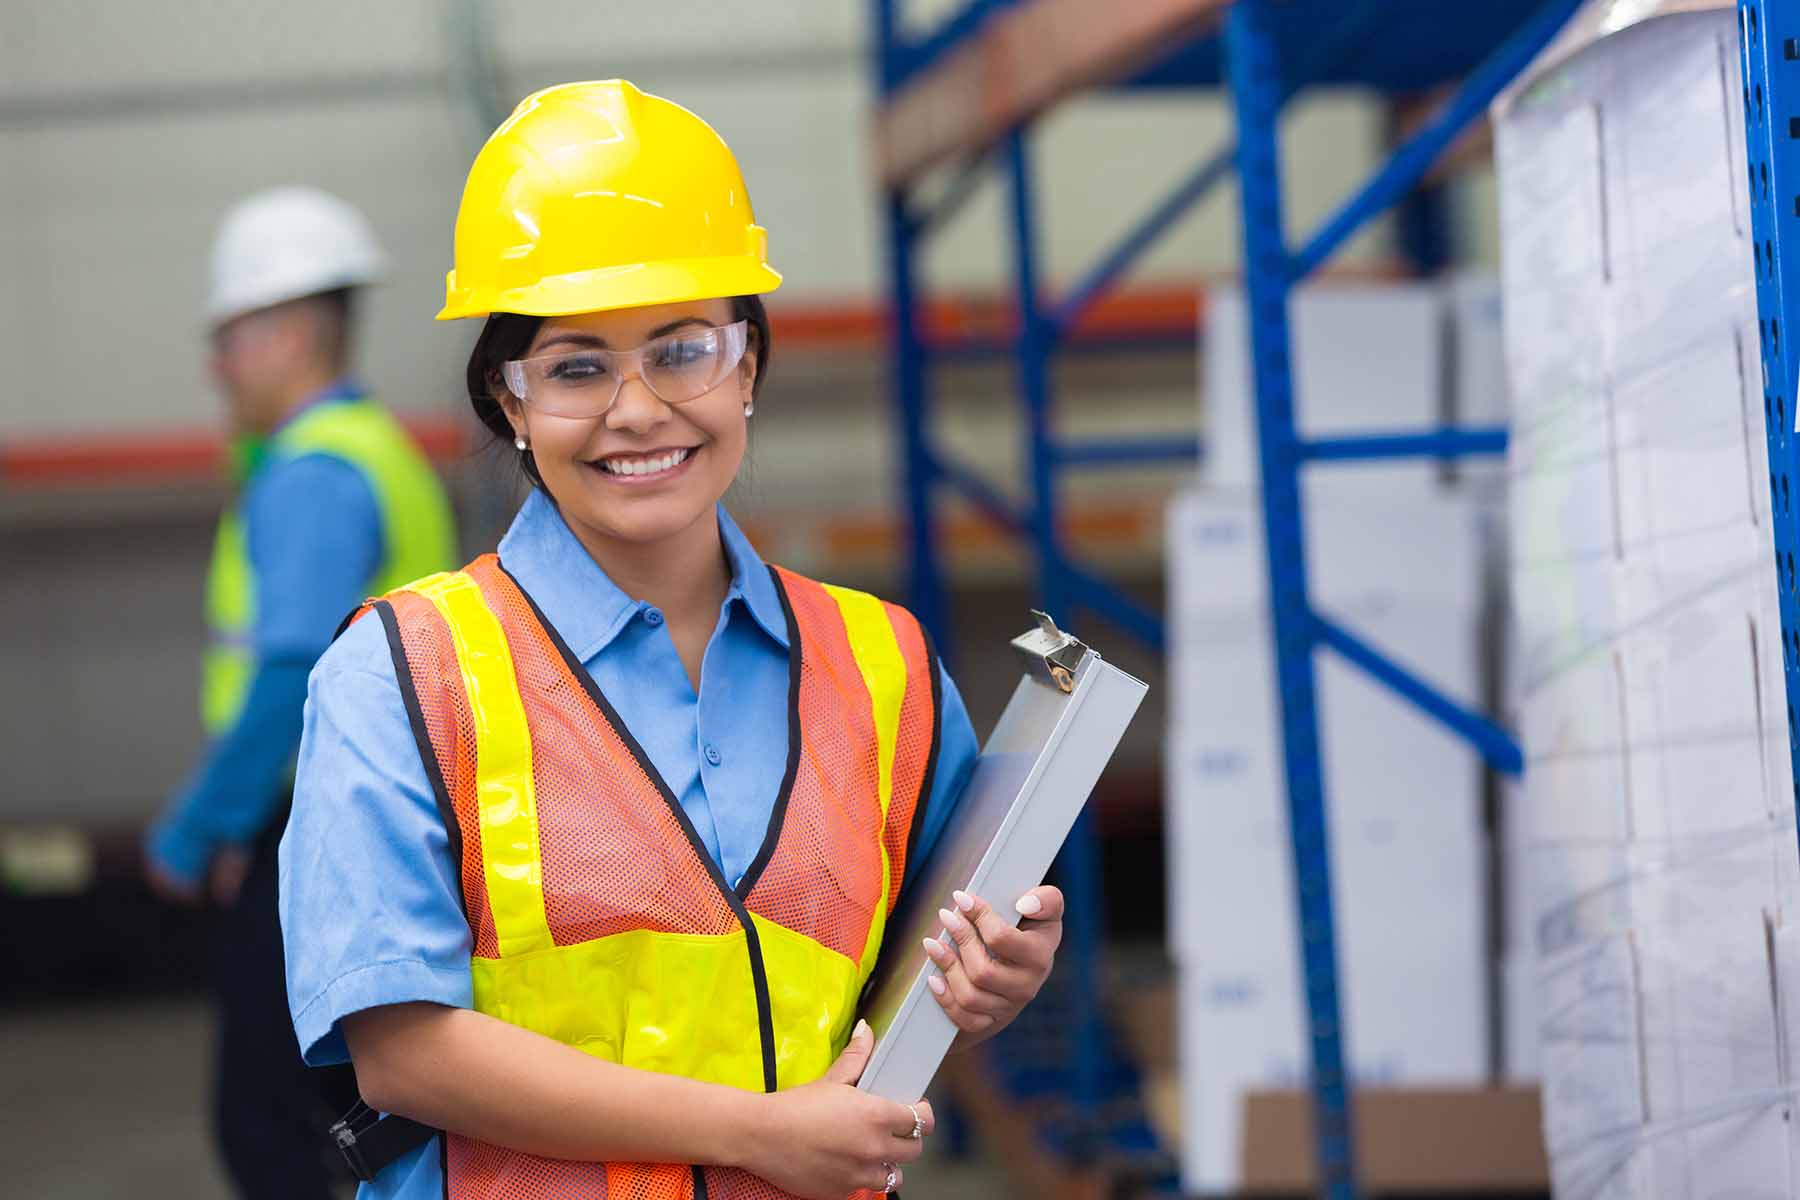 Employee Safety – A Foremost Responsibility for Front-line Supervisors